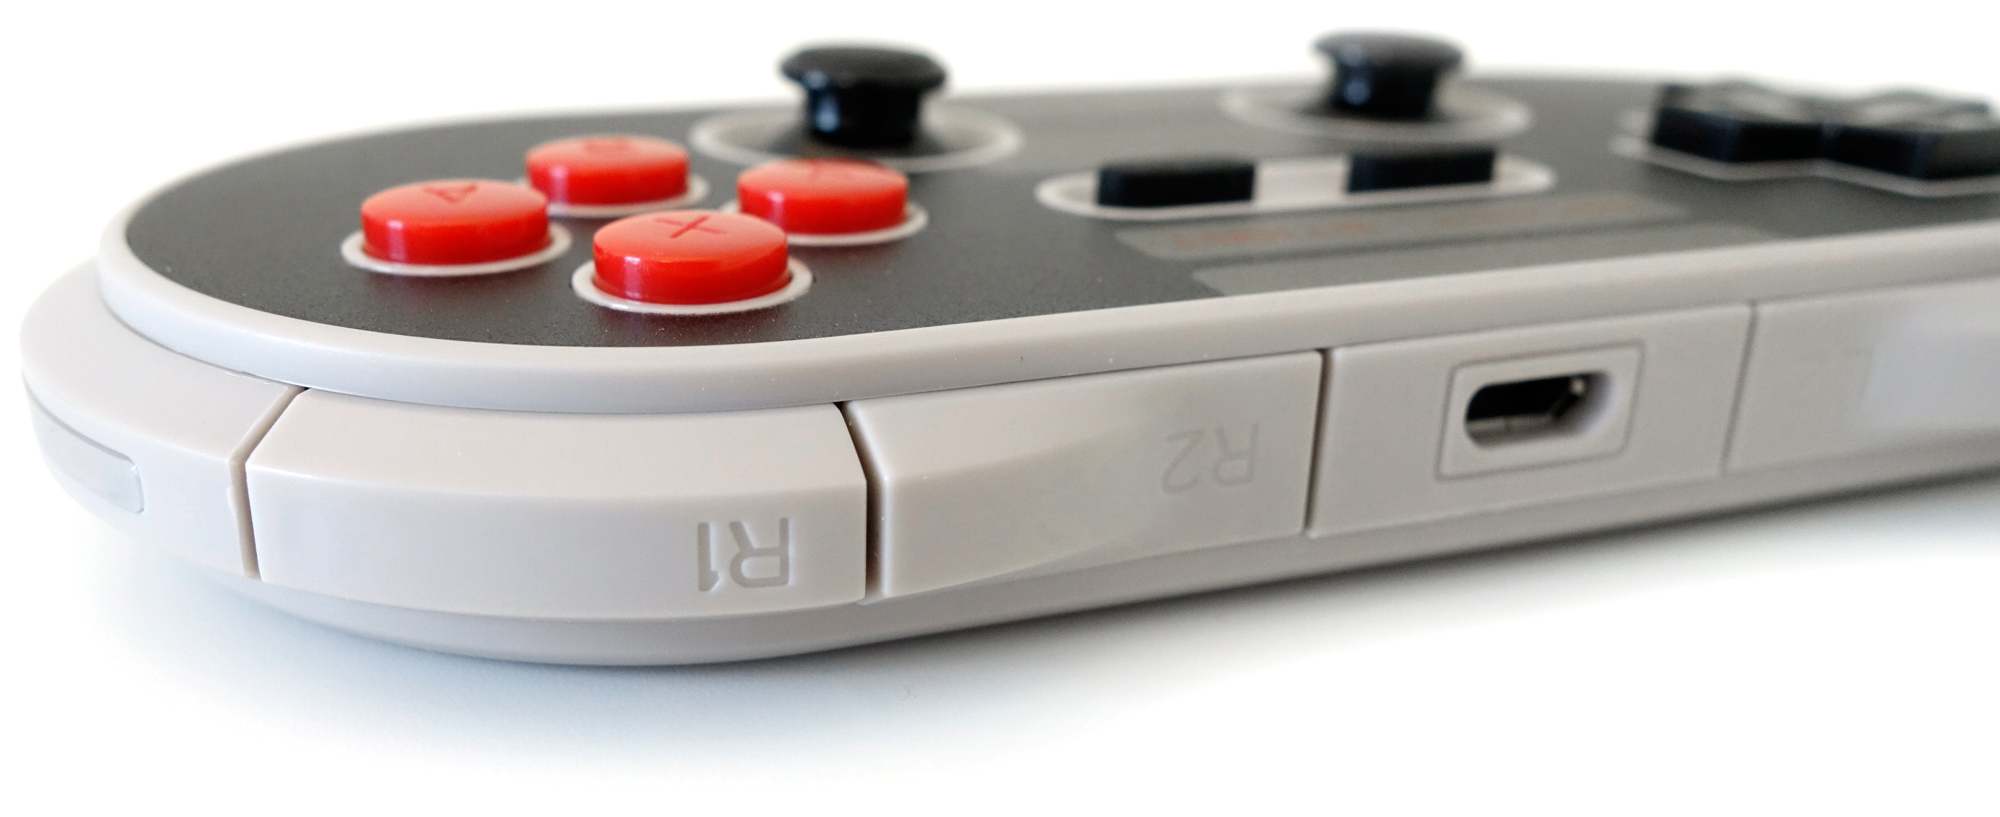 The NES30 Pro Is The Perfect Portable Controller For The Nintendo Switch